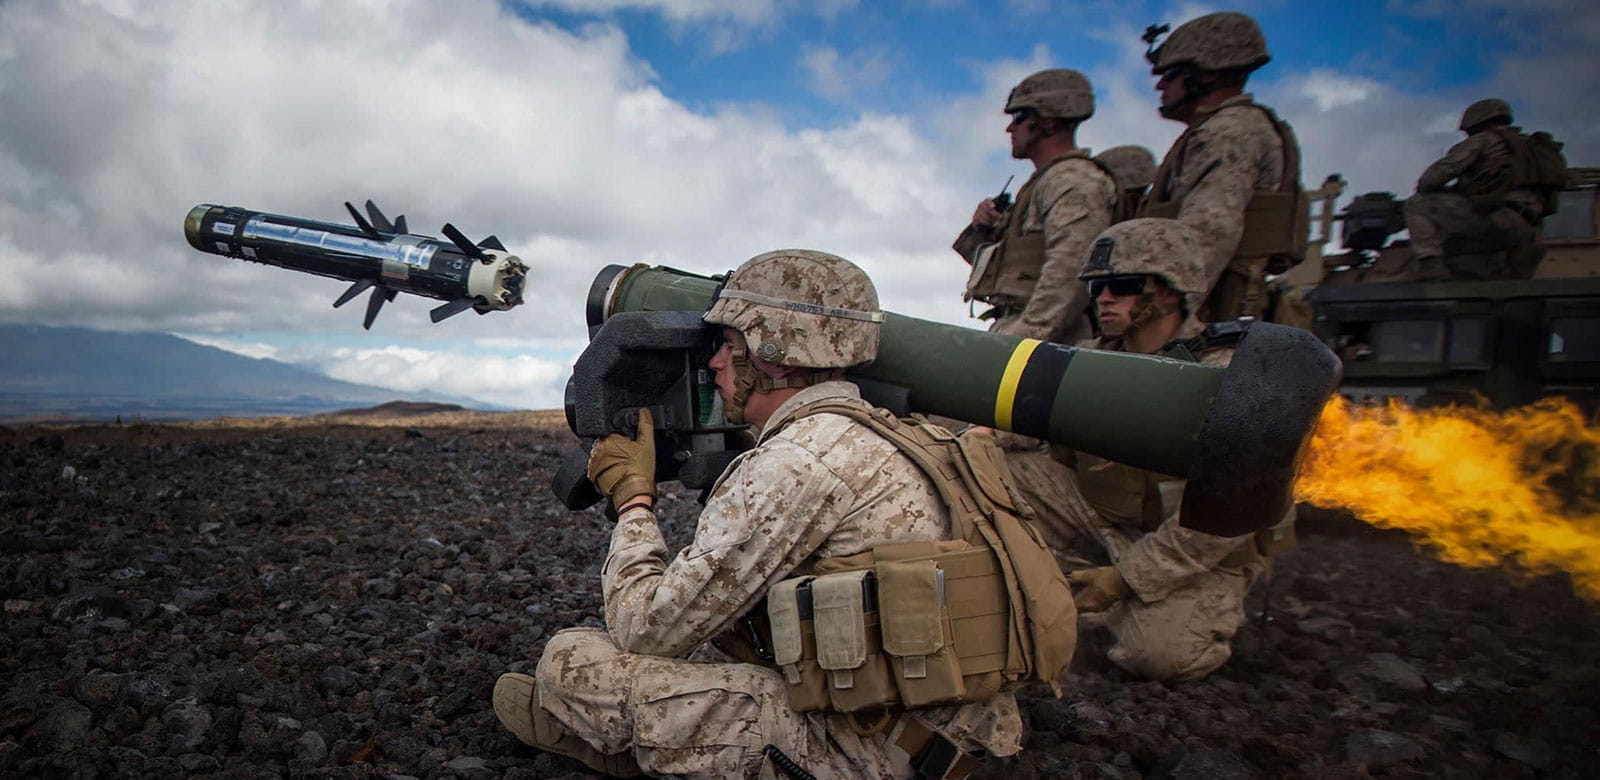 Soldiers watching as another soldier with a shoulder-held launcher deploys a javalin missile